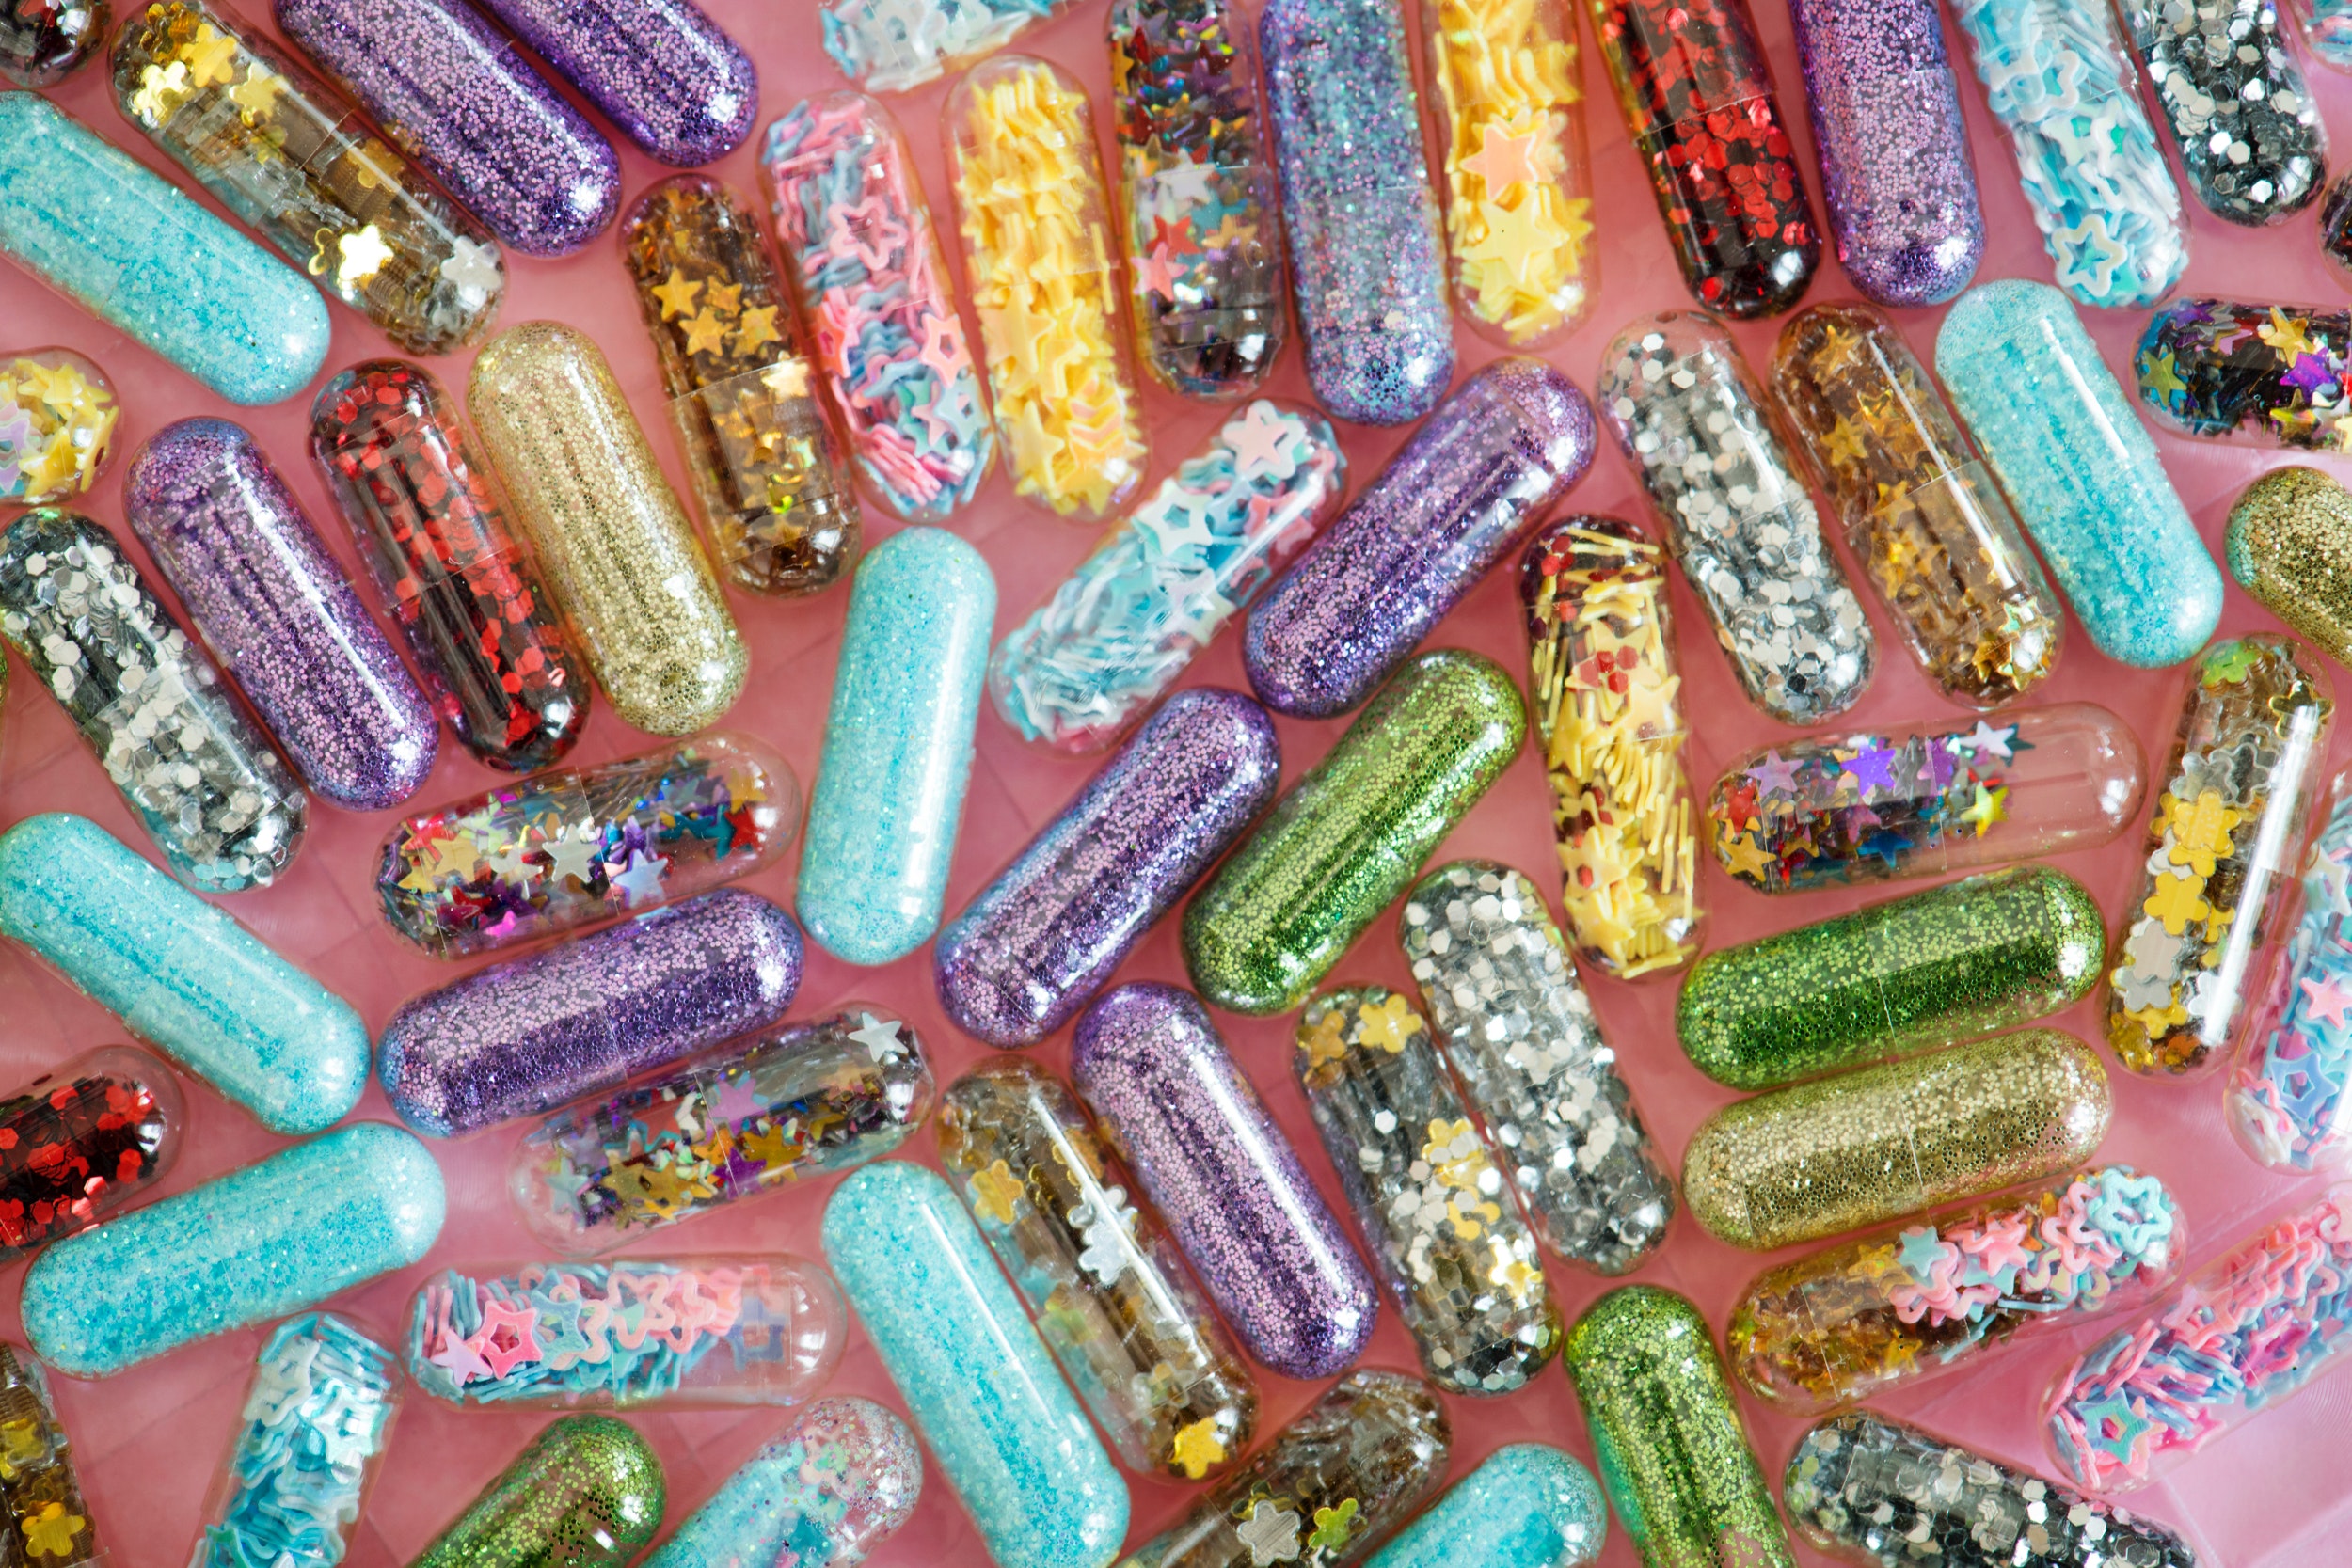 Gelatin capsules filled with glitter